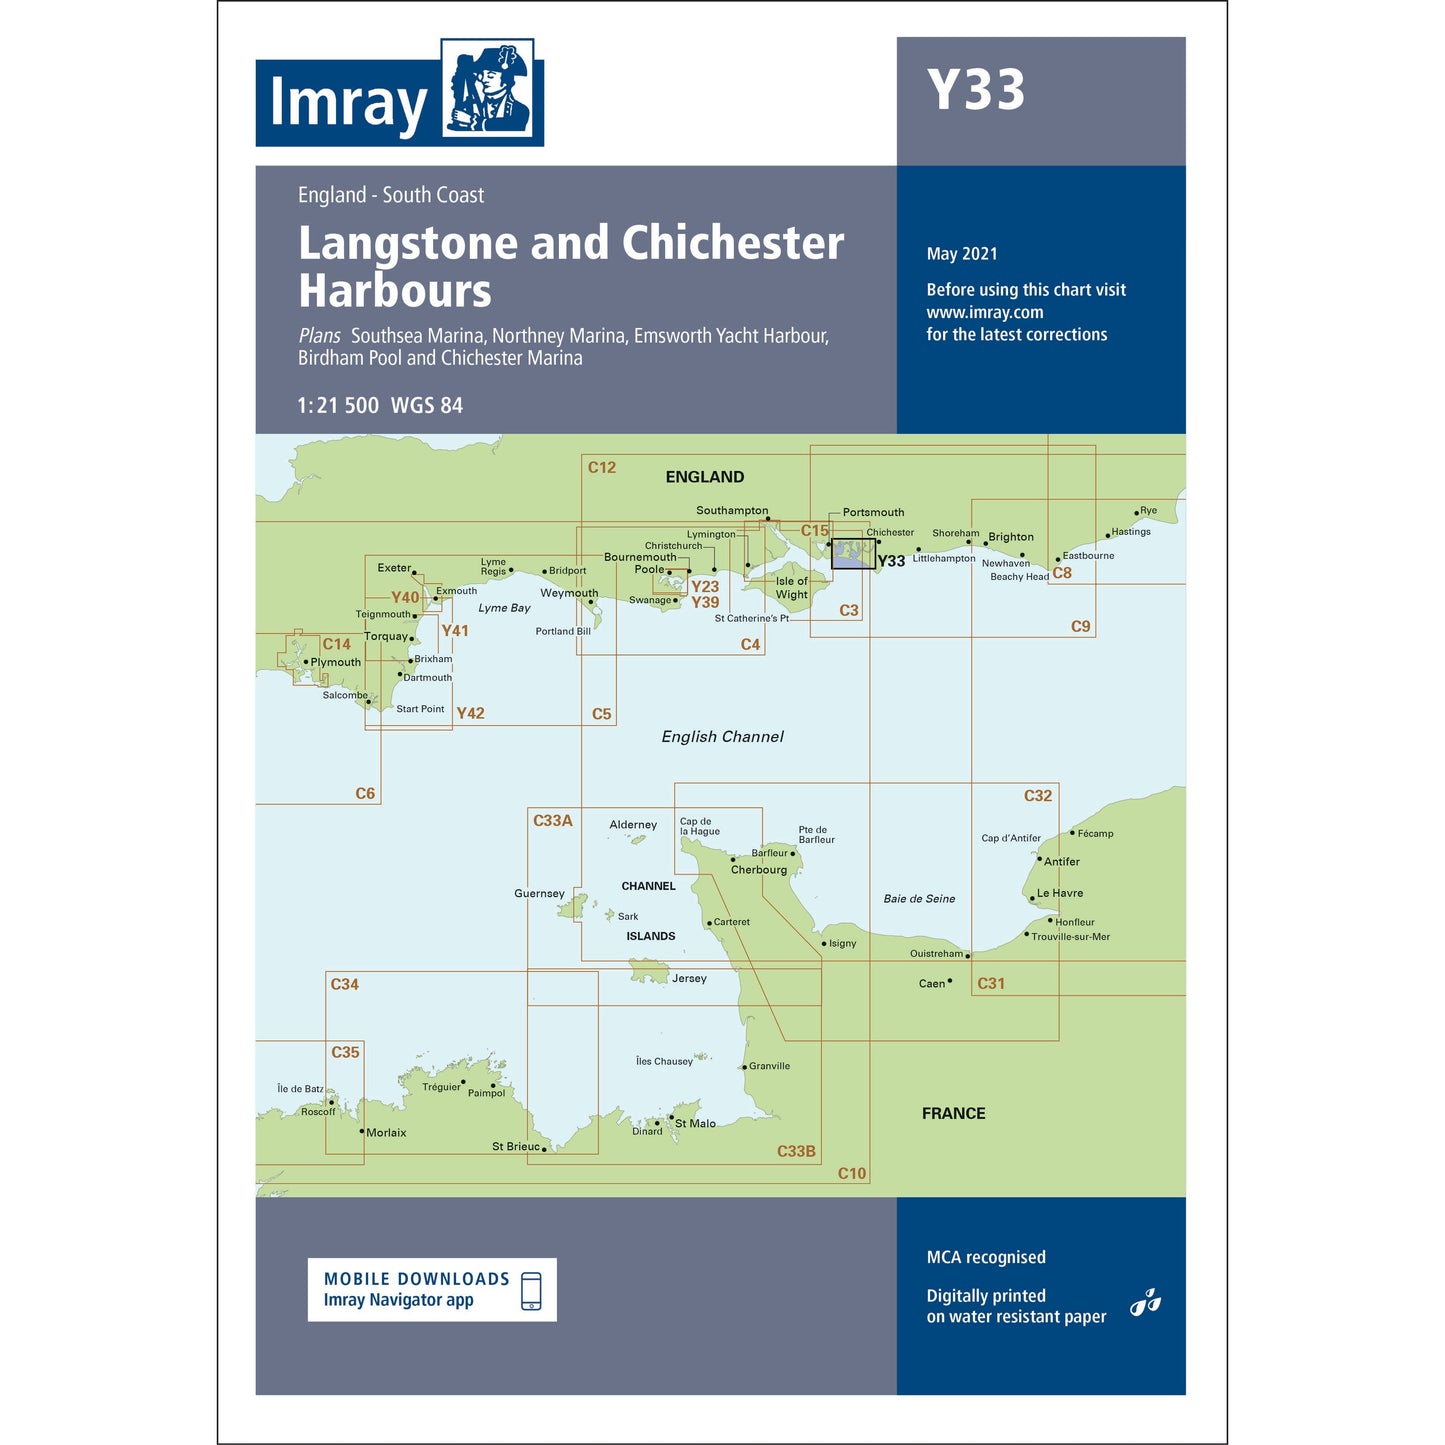 CARTE IMRAY Y33 LANGSTONE AND CHCHESTER HARBOURS